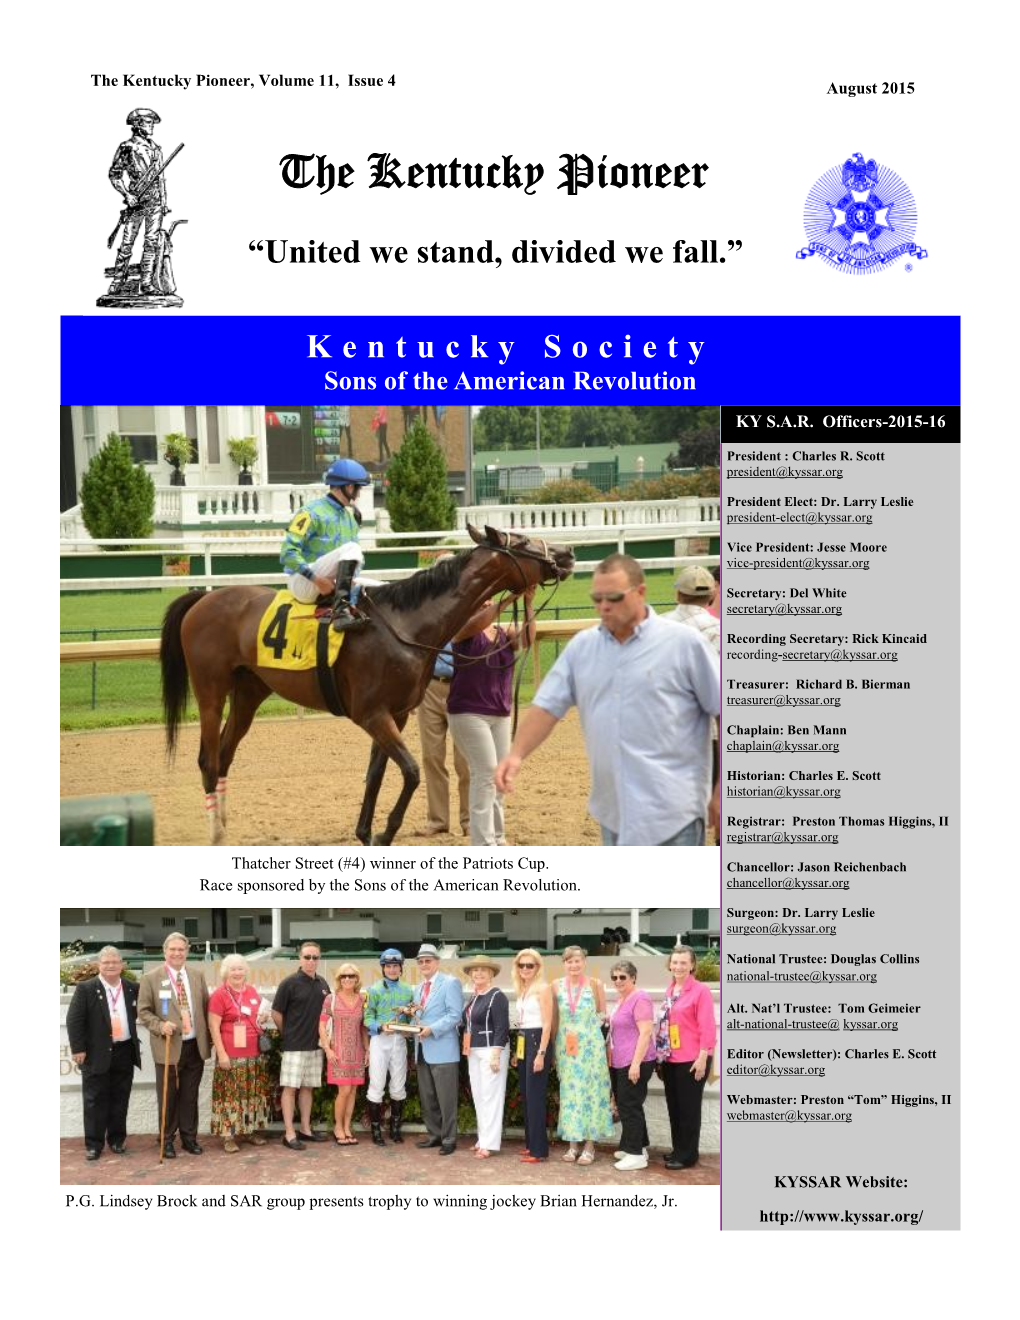 The Kentucky Pioneer, Volume 11, Issue 4 August 2015